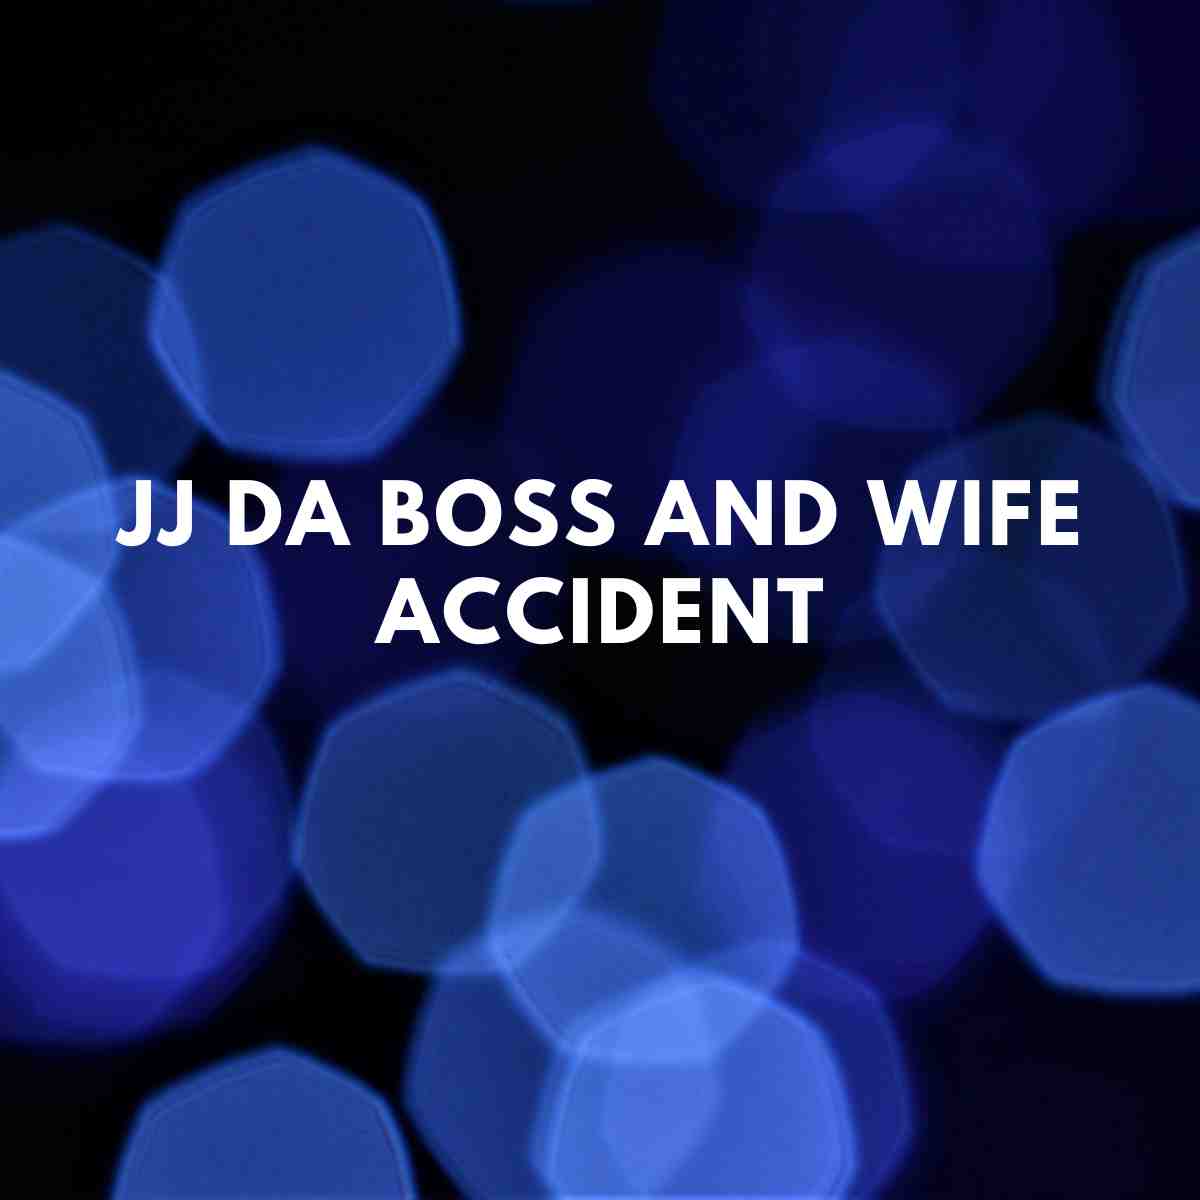 JJ da Boss and wife accident